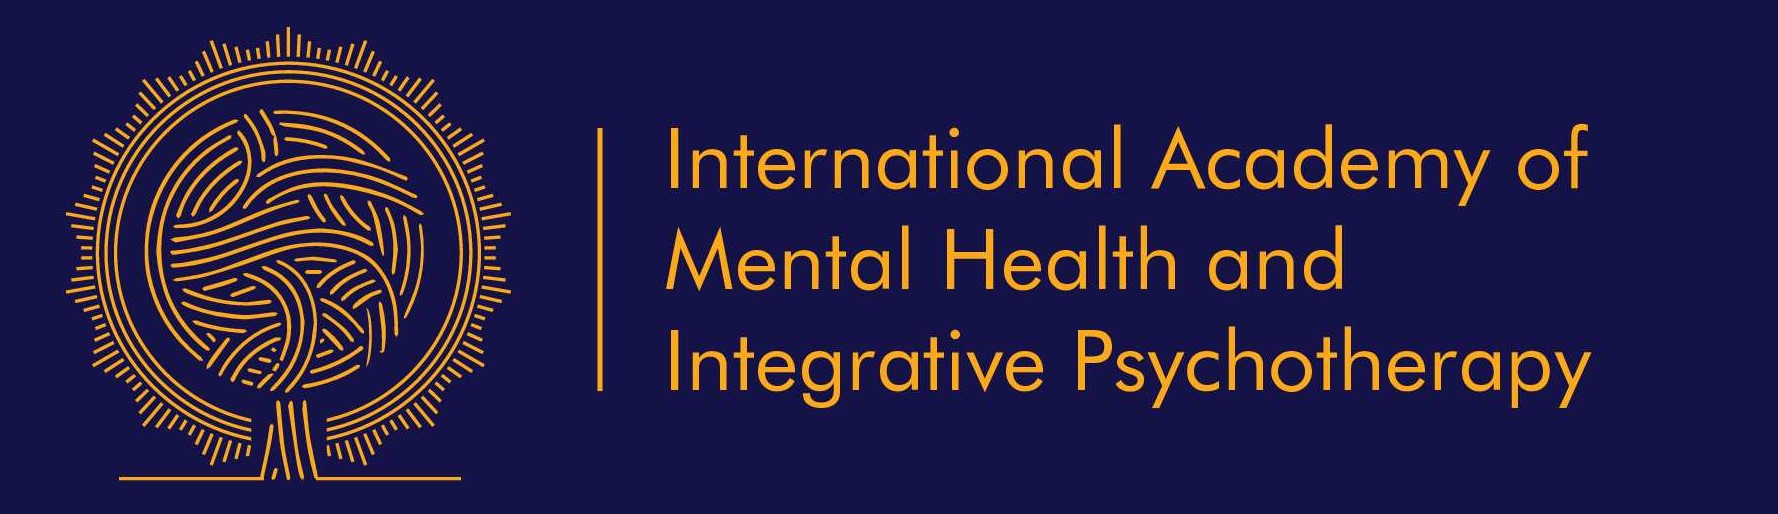 International Academy of Mental Health and Integrative Psychotherapy